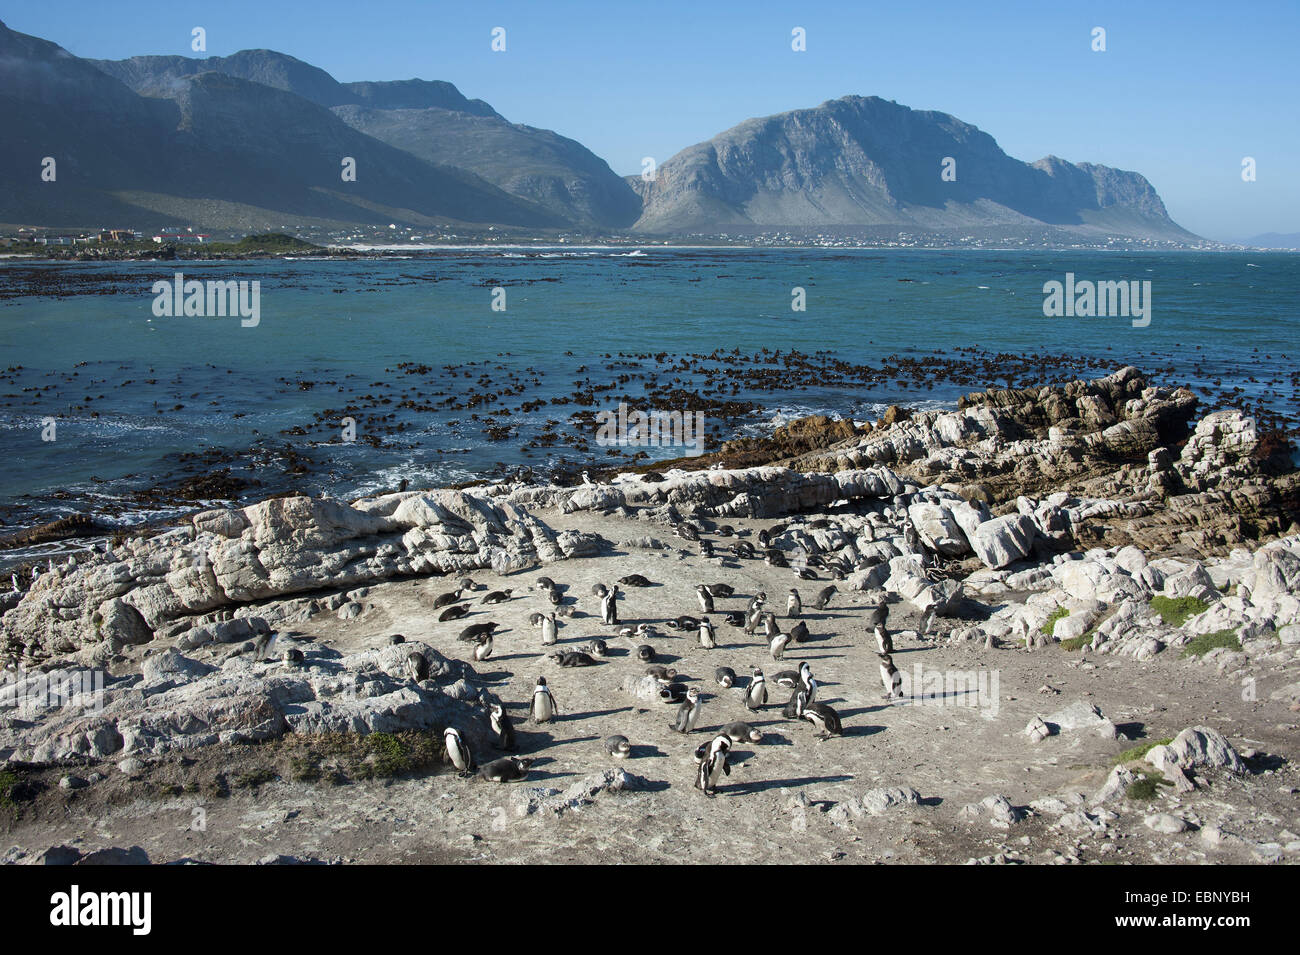 jackass penguin, African penguin, black-footed penguin (Spheniscus demersus), small colony at the rocky Atlantic coast, South Africa, Western Cape, Bettys Bay Stock Photo